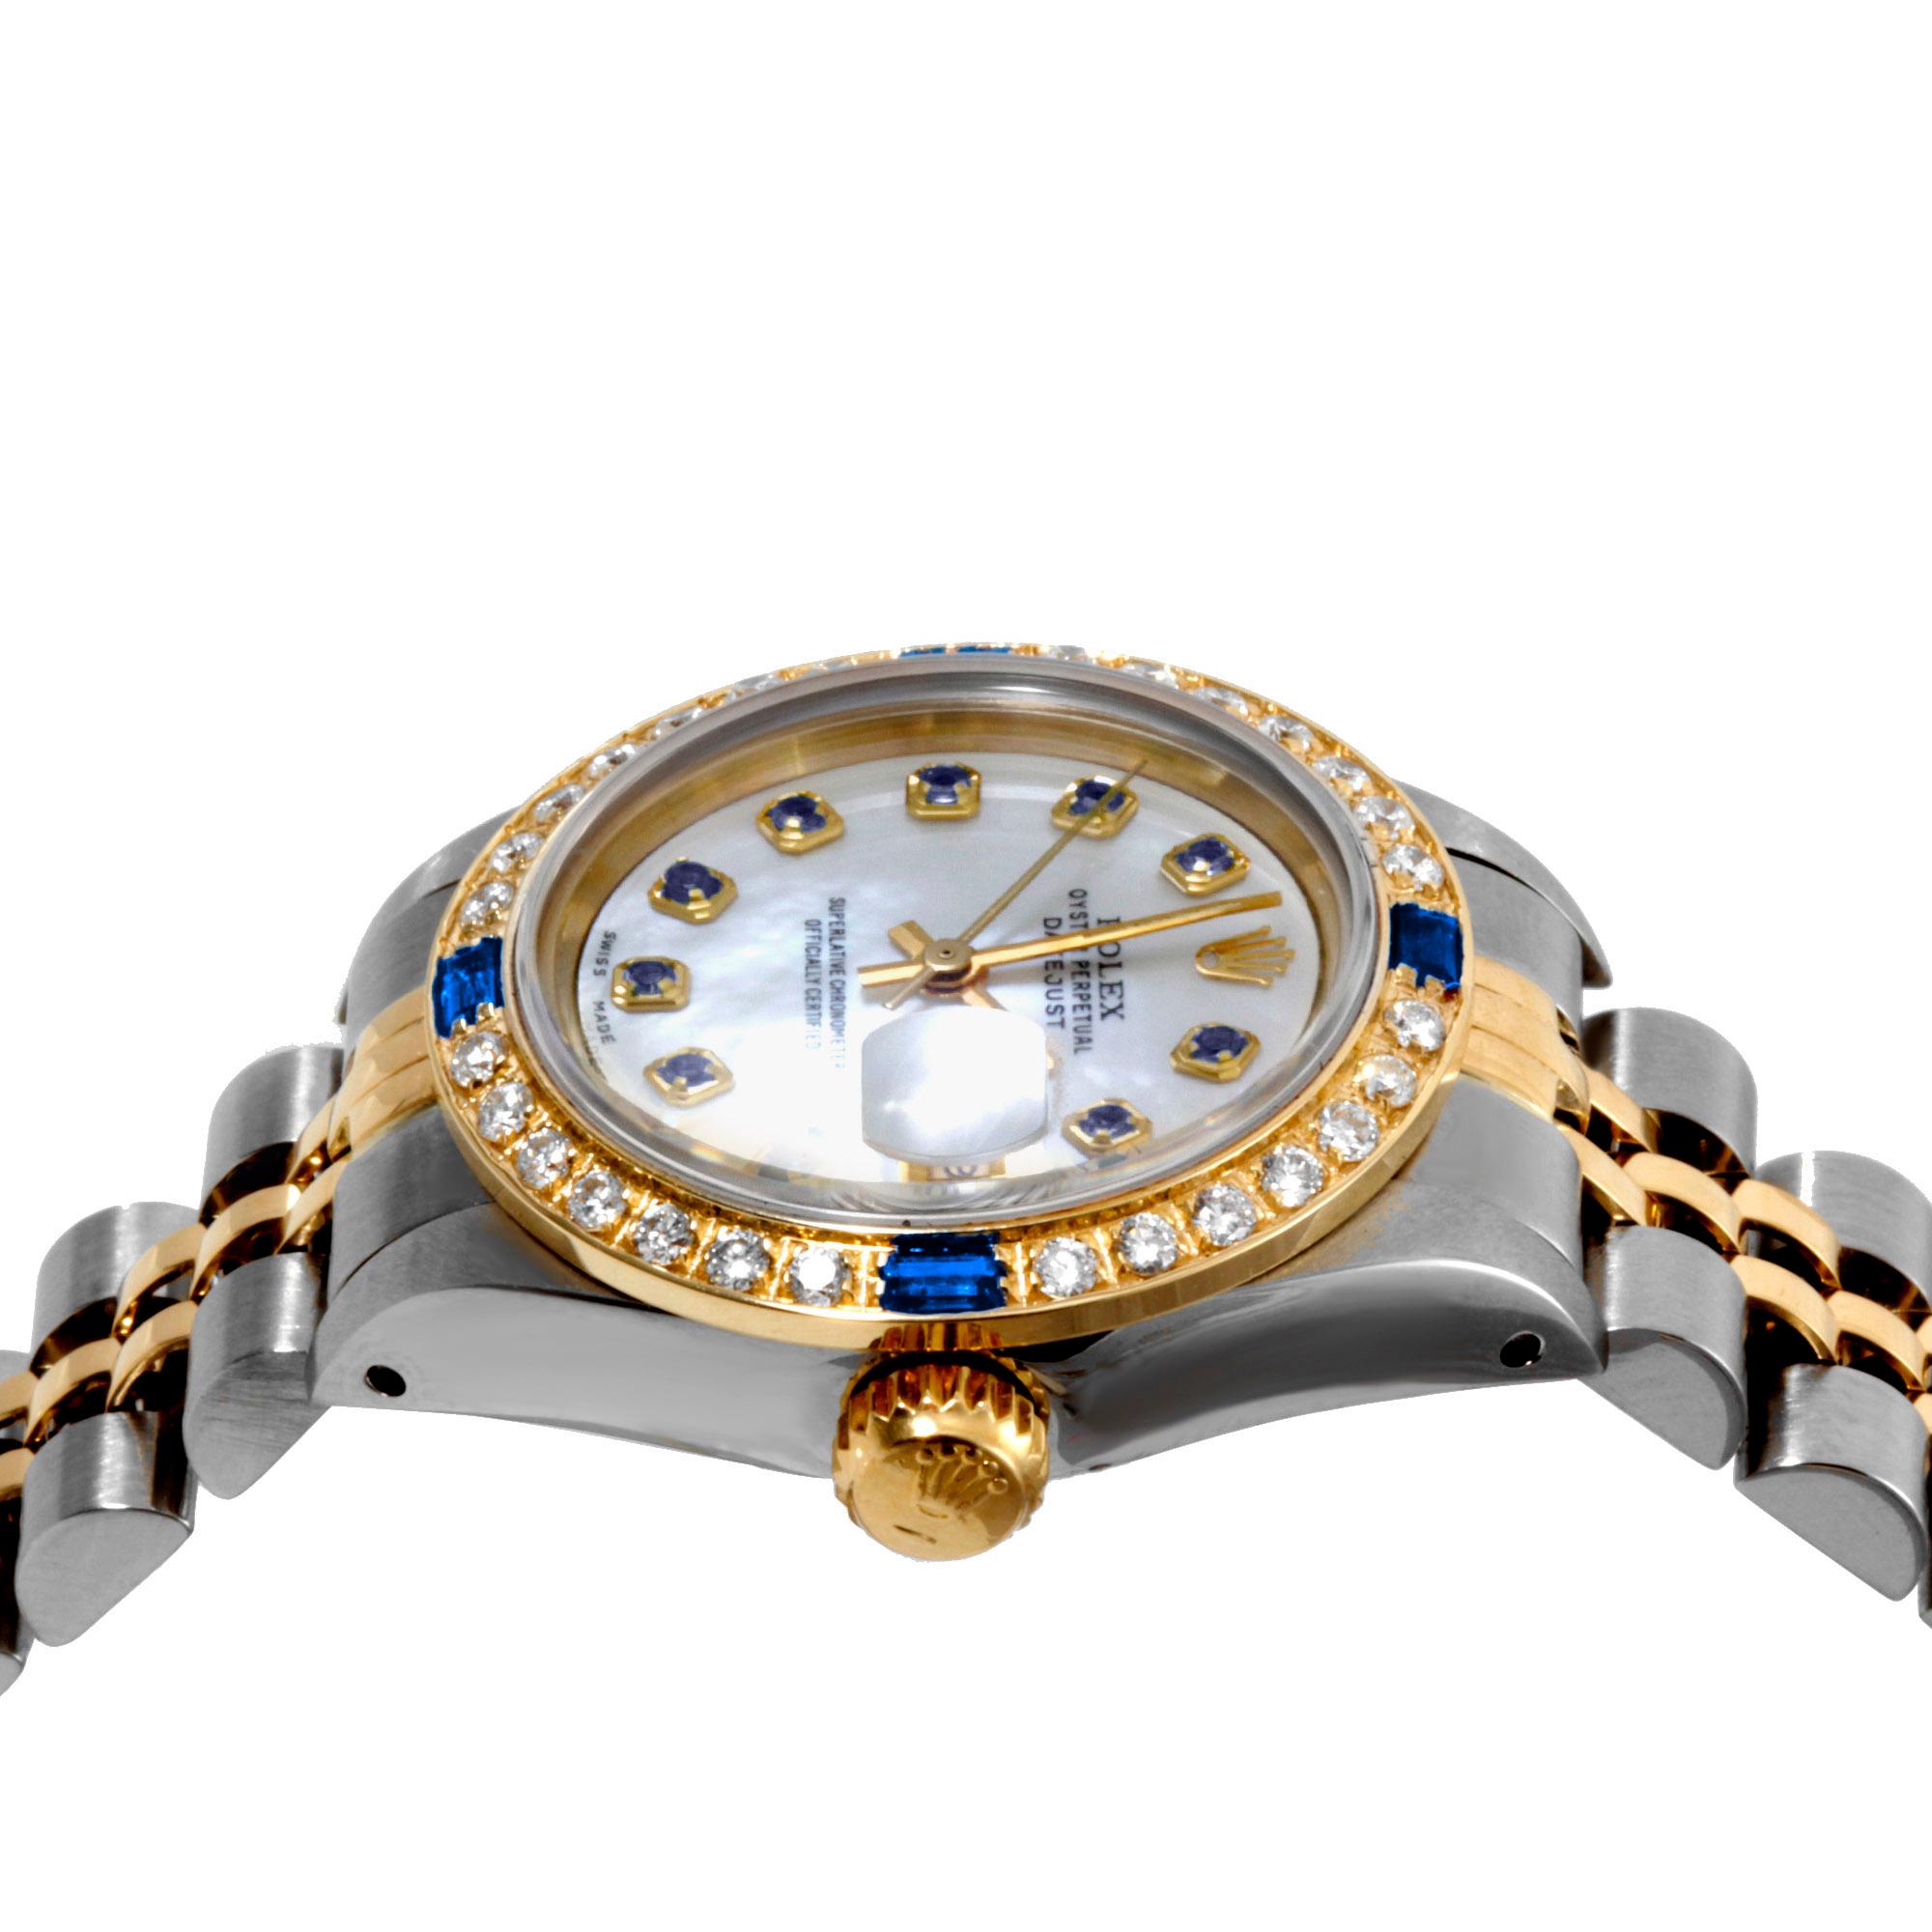 (Watch Description) 
Brand - Rolex
Gender - Ladies
Model - 69173 Datejust
Metals - Steel / Yellow Gold
Case size - 26mm
Bezel - Yellow Gold Diamond/Sapphire
Crystal - sapphire
Movement - Automatic Cal.2135
Dial - Refinished Mother of pearl